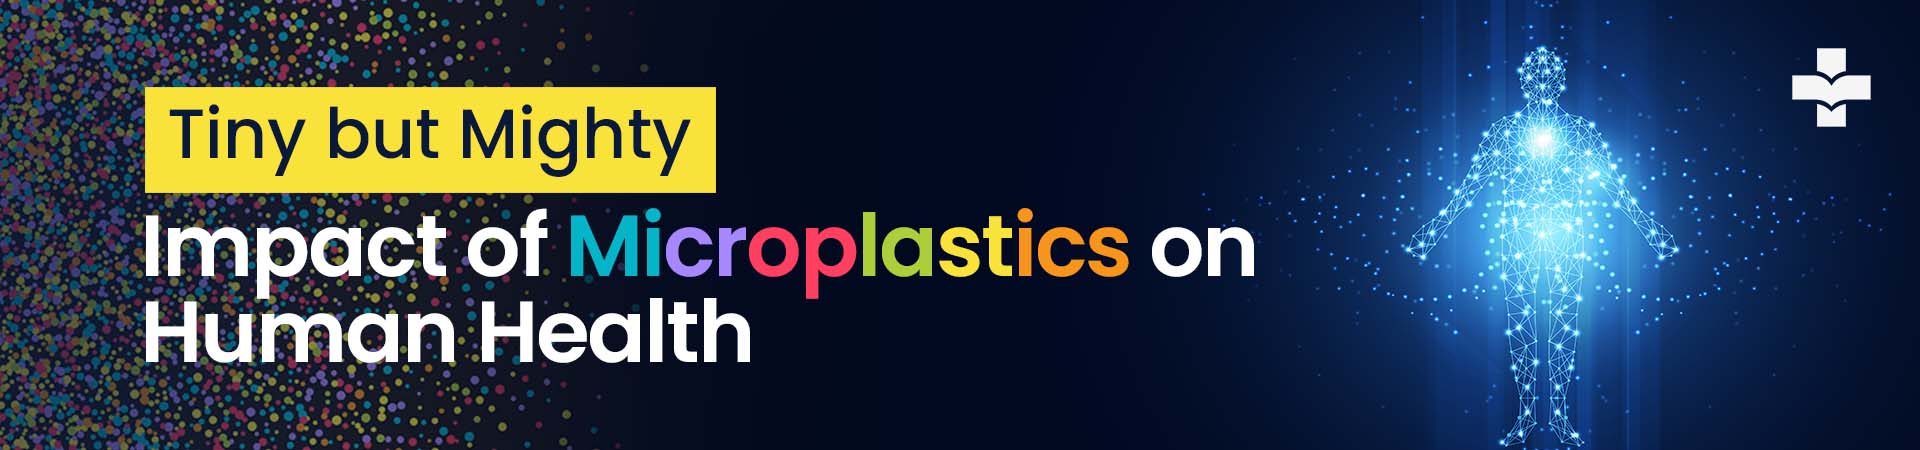 Explore the repercussions of microplastics on human health. This article provides insights into the potential impact and considerations associated with the presence of microplastics in our environment and bodies.